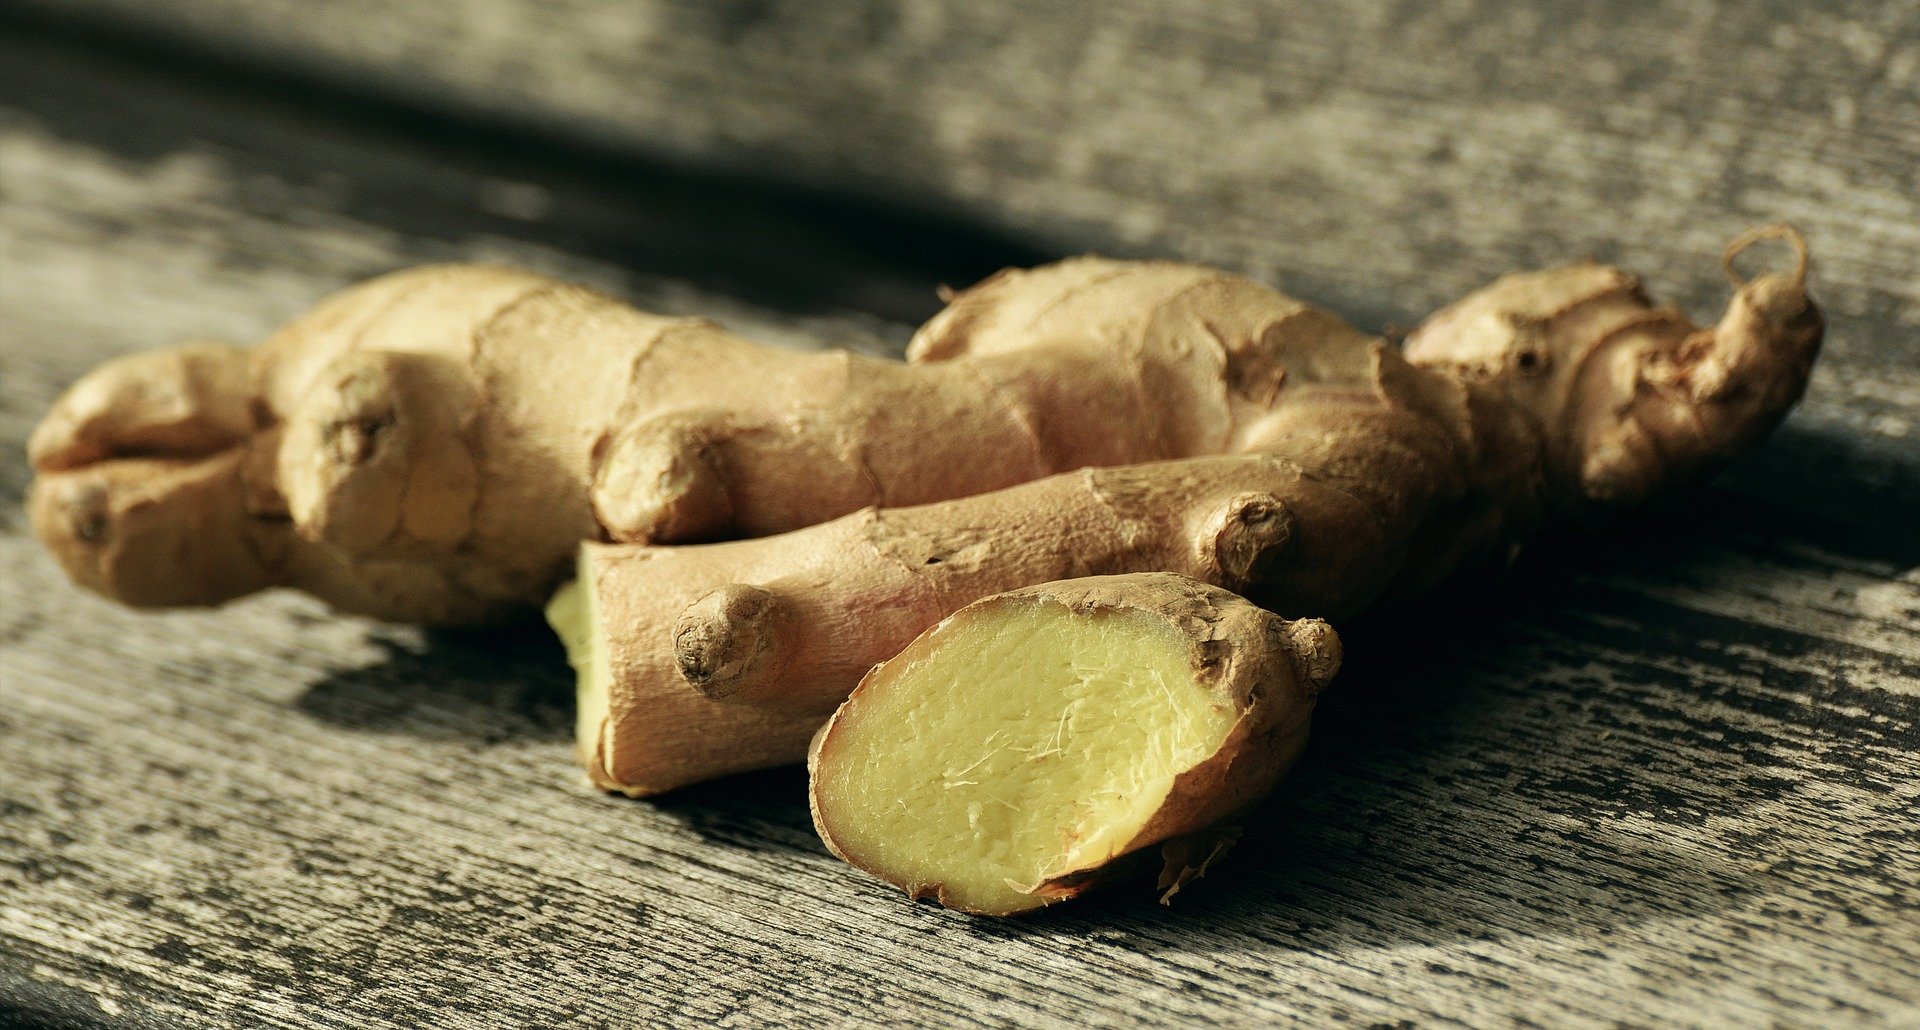 New research finds ginger shows certain autoimmune diseases in mice